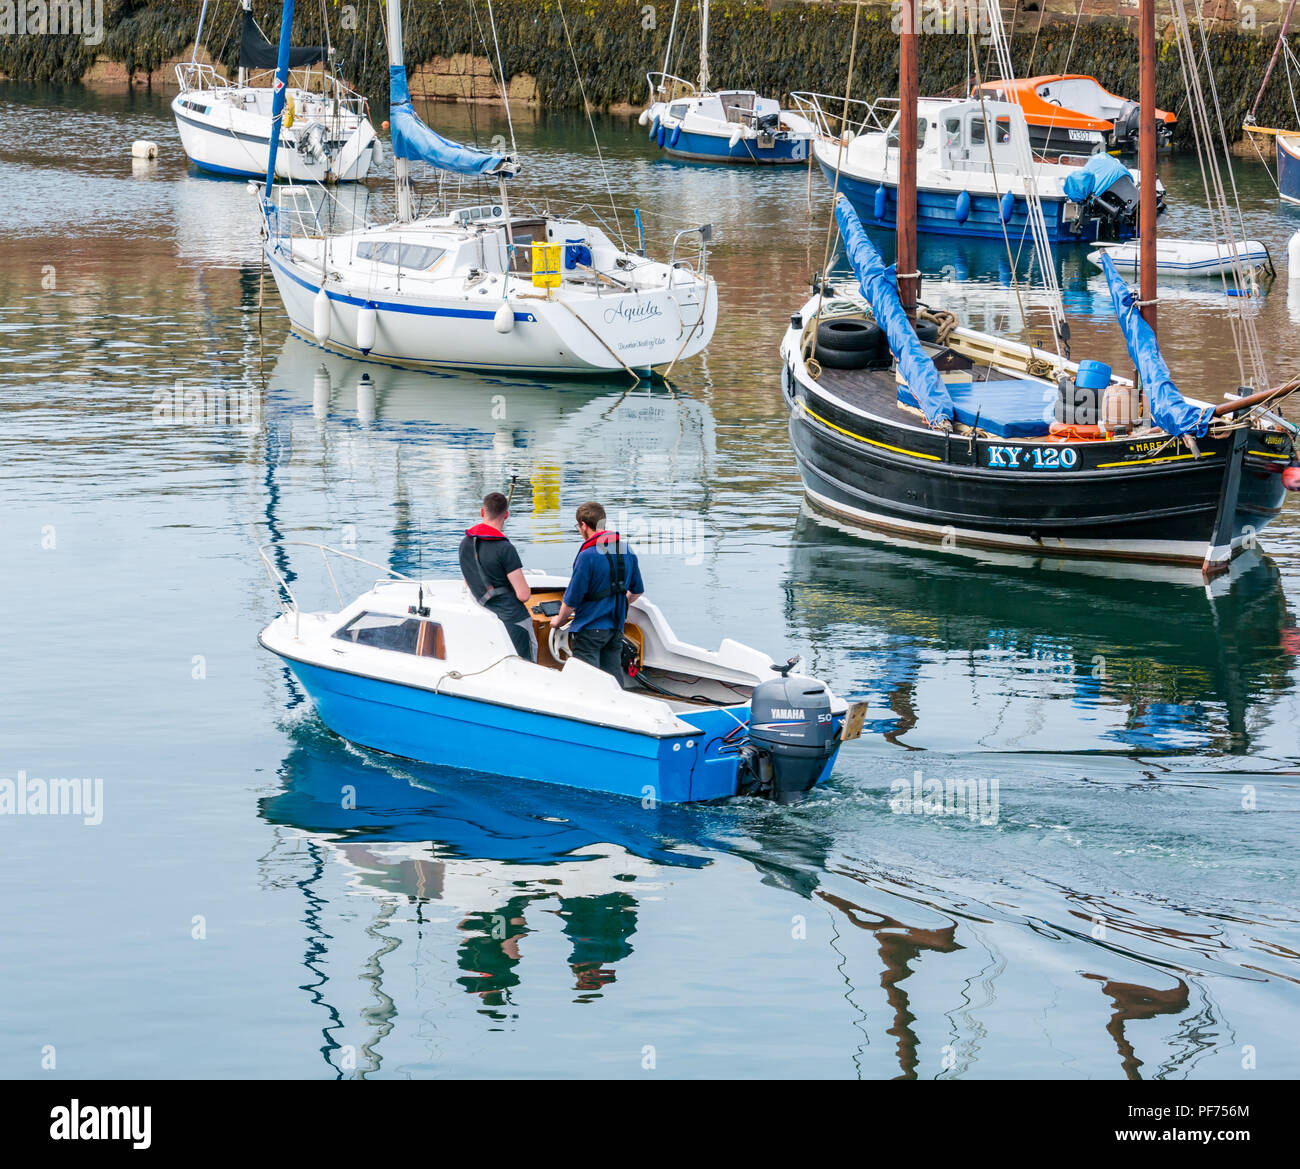 Dunbar, East Lothian, Scotland, United Kingdom, 20th August 2018. UK Sunshine in Dunbar harbour. Two men leave the harbour in a small boat with moored boats including fishing boats and yachts Stock Photo